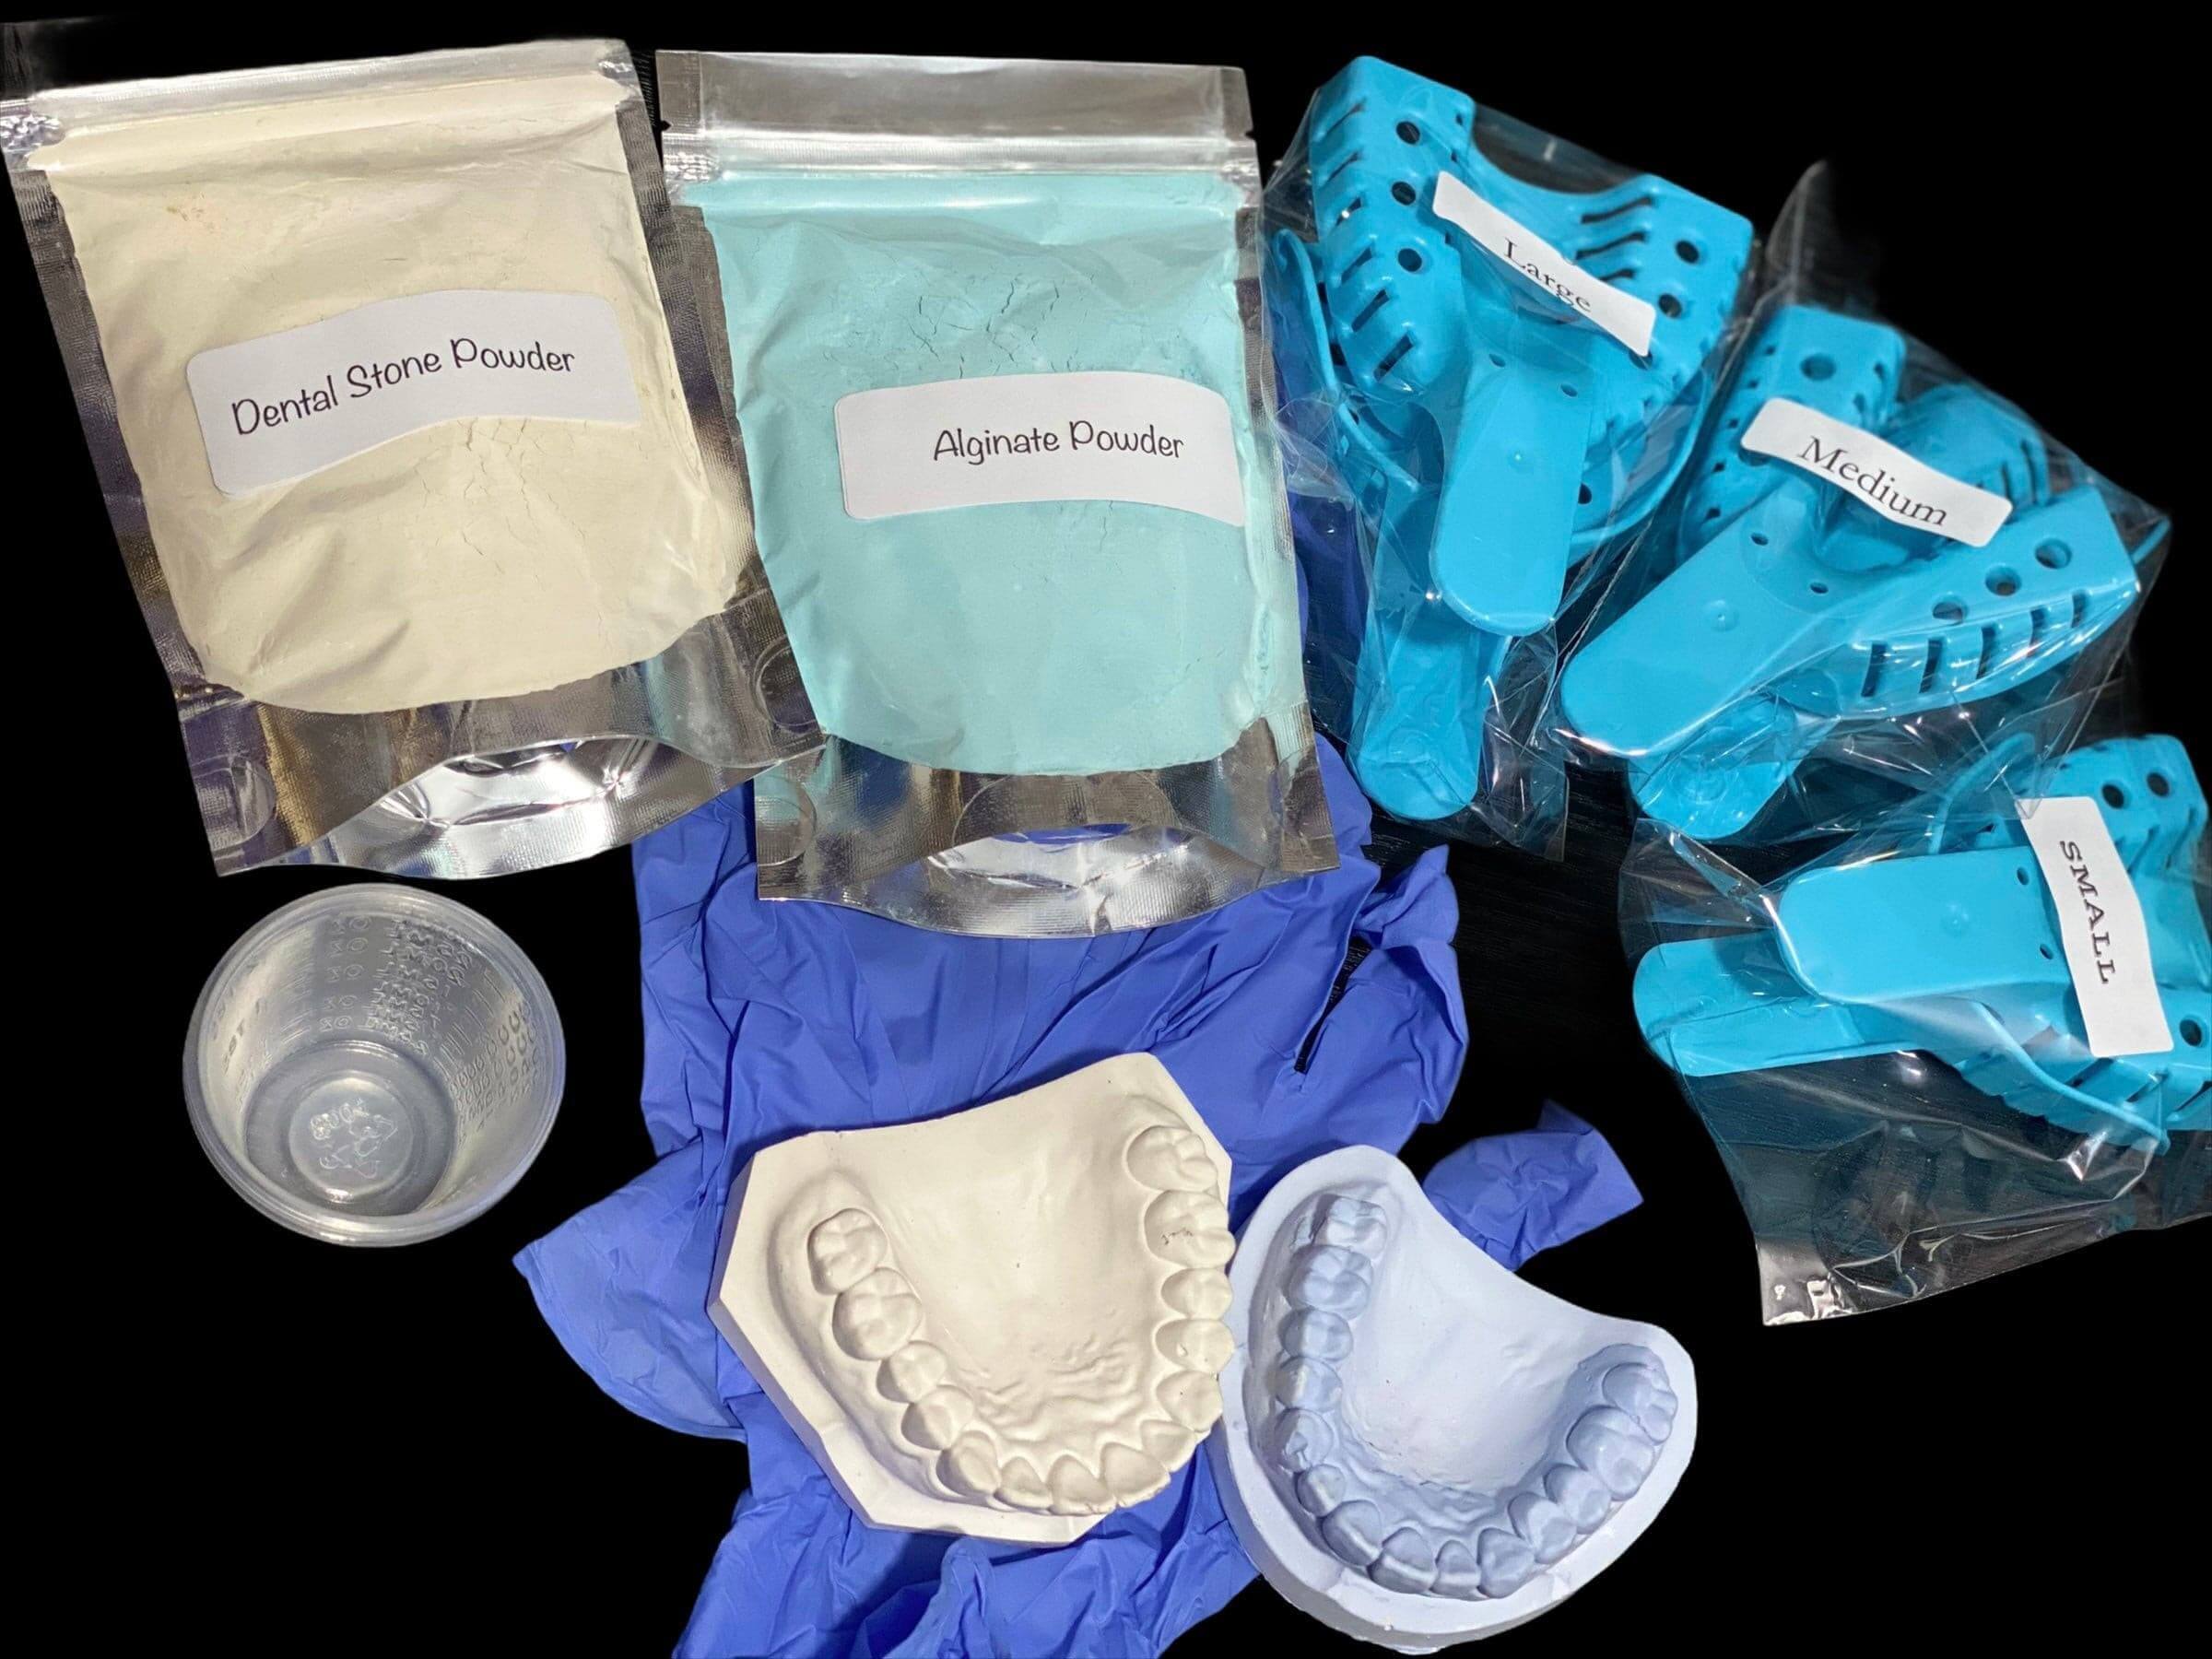 DIY Tooth Molding Kit Taking Teeth Impression Mold Cast Oral Full Mouth  Whitening Products Alginate Gypsum